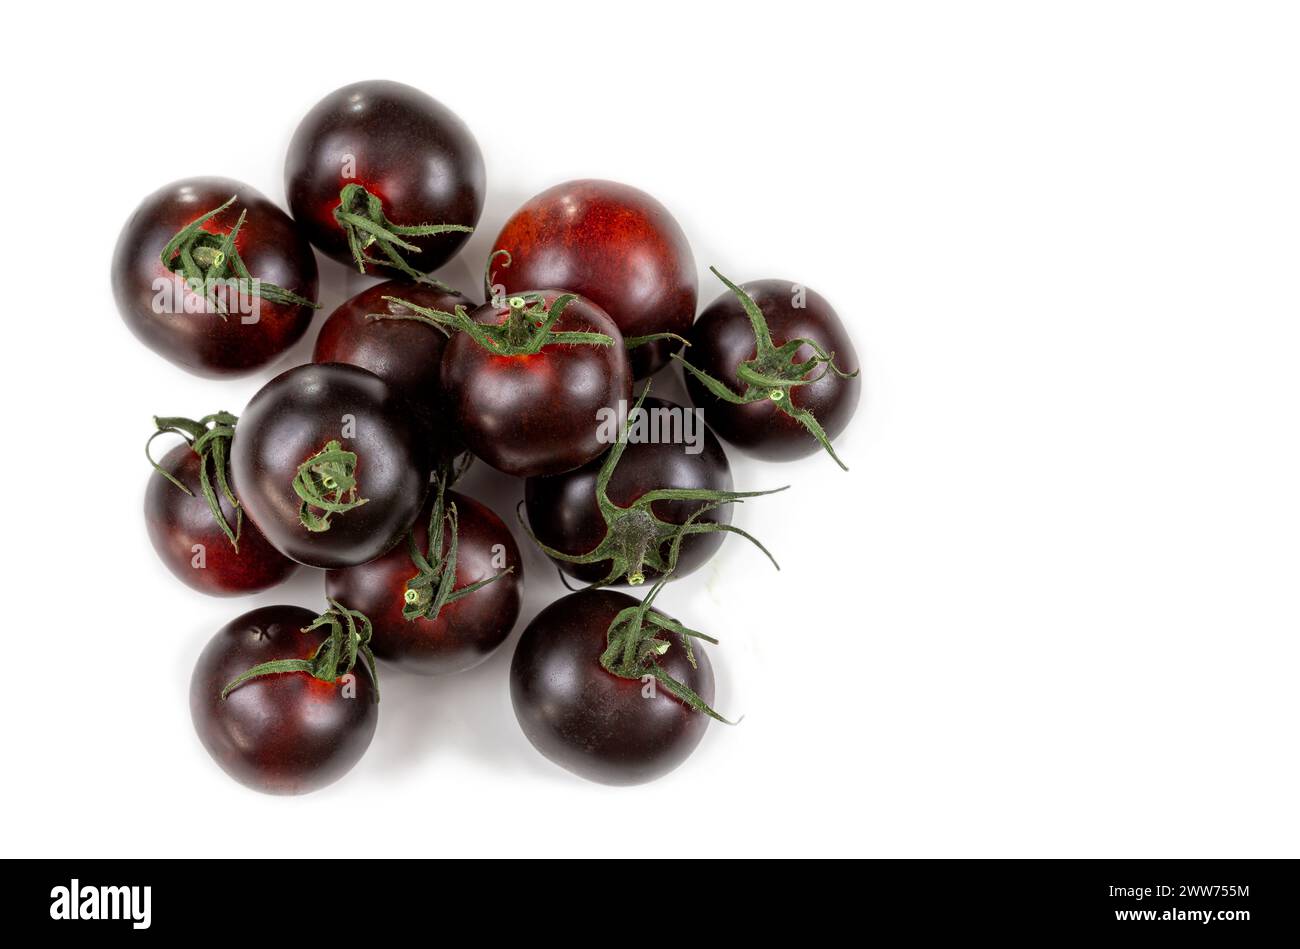 Handful of purple tomatoes top view on white background. Stock Photo